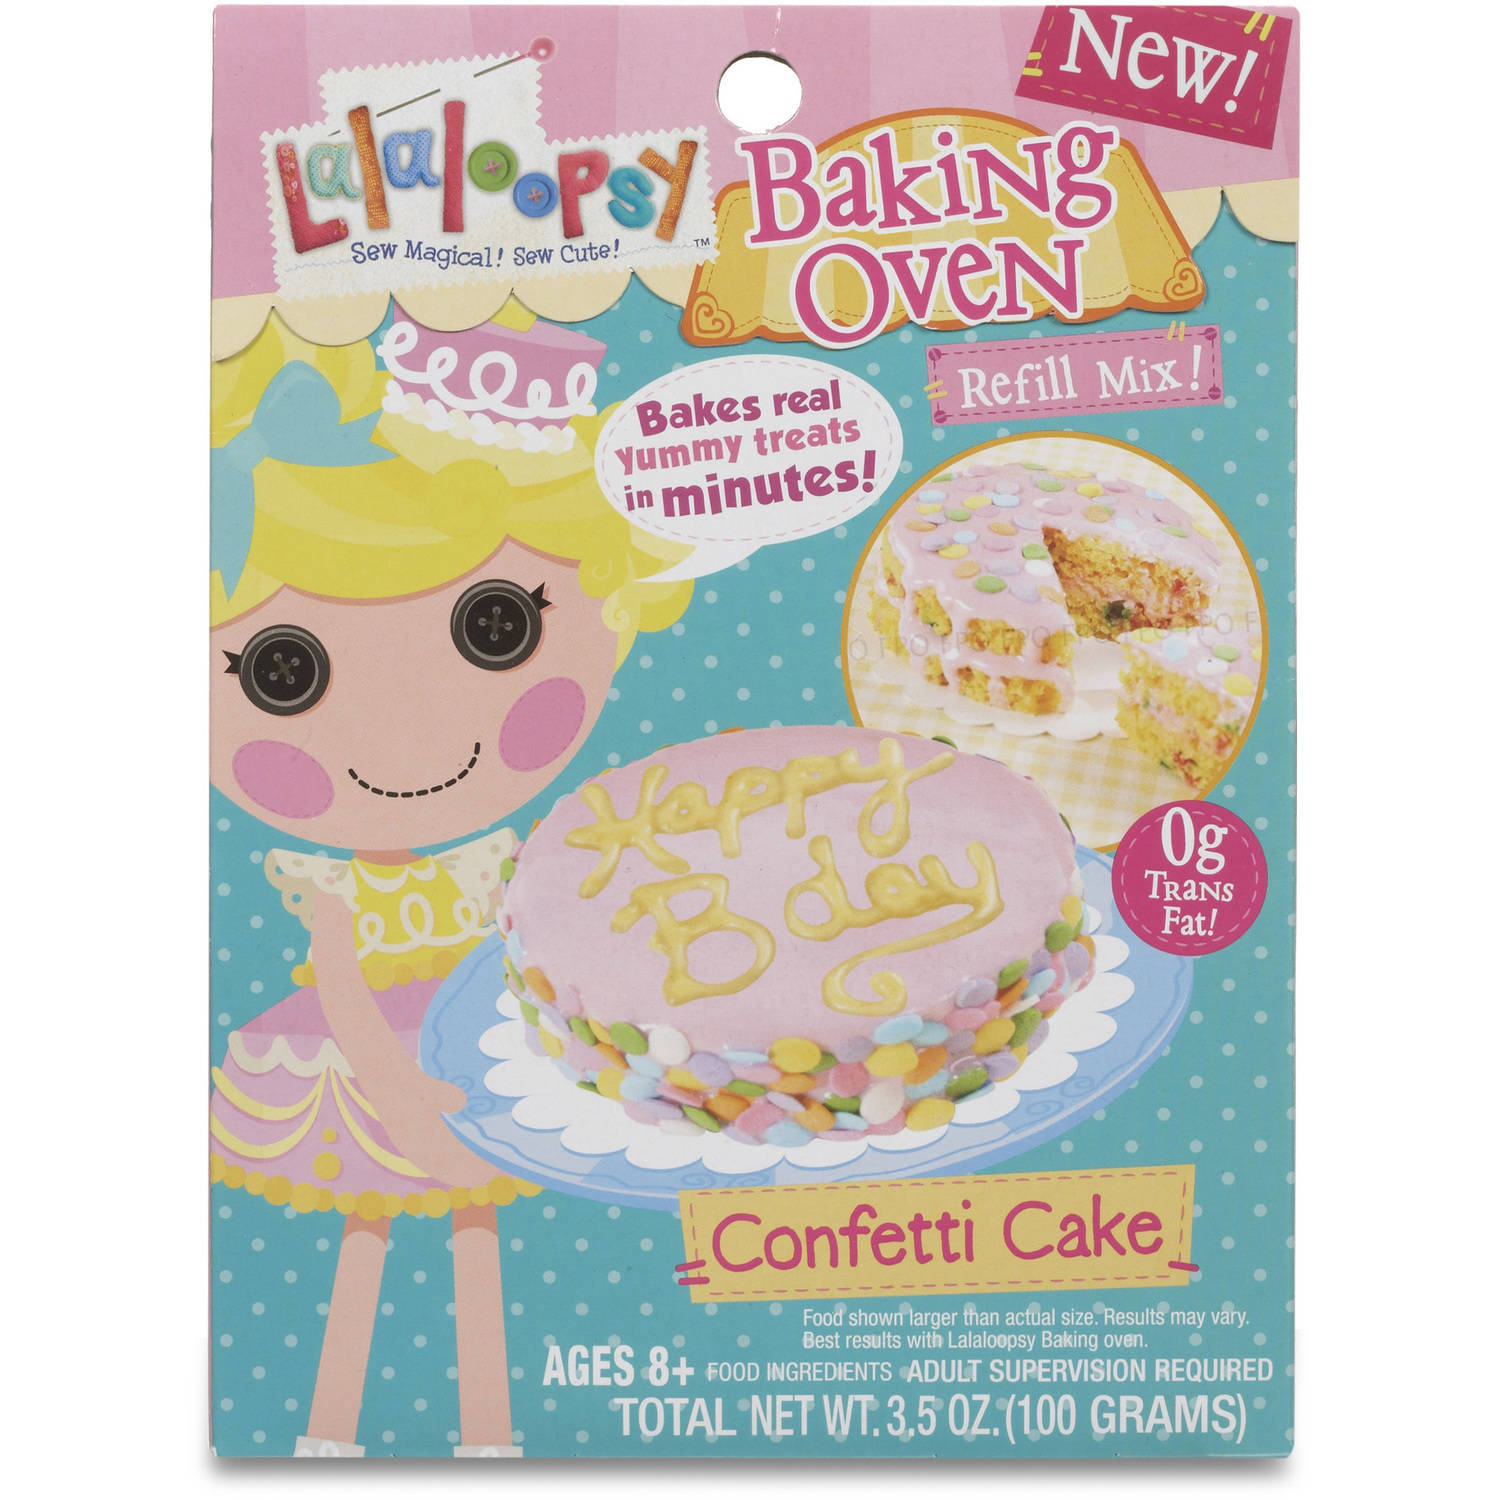 Lalaloopsy Baking Oven Mix Confetti Cake with Hot Pink Frosting - image 1 of 3